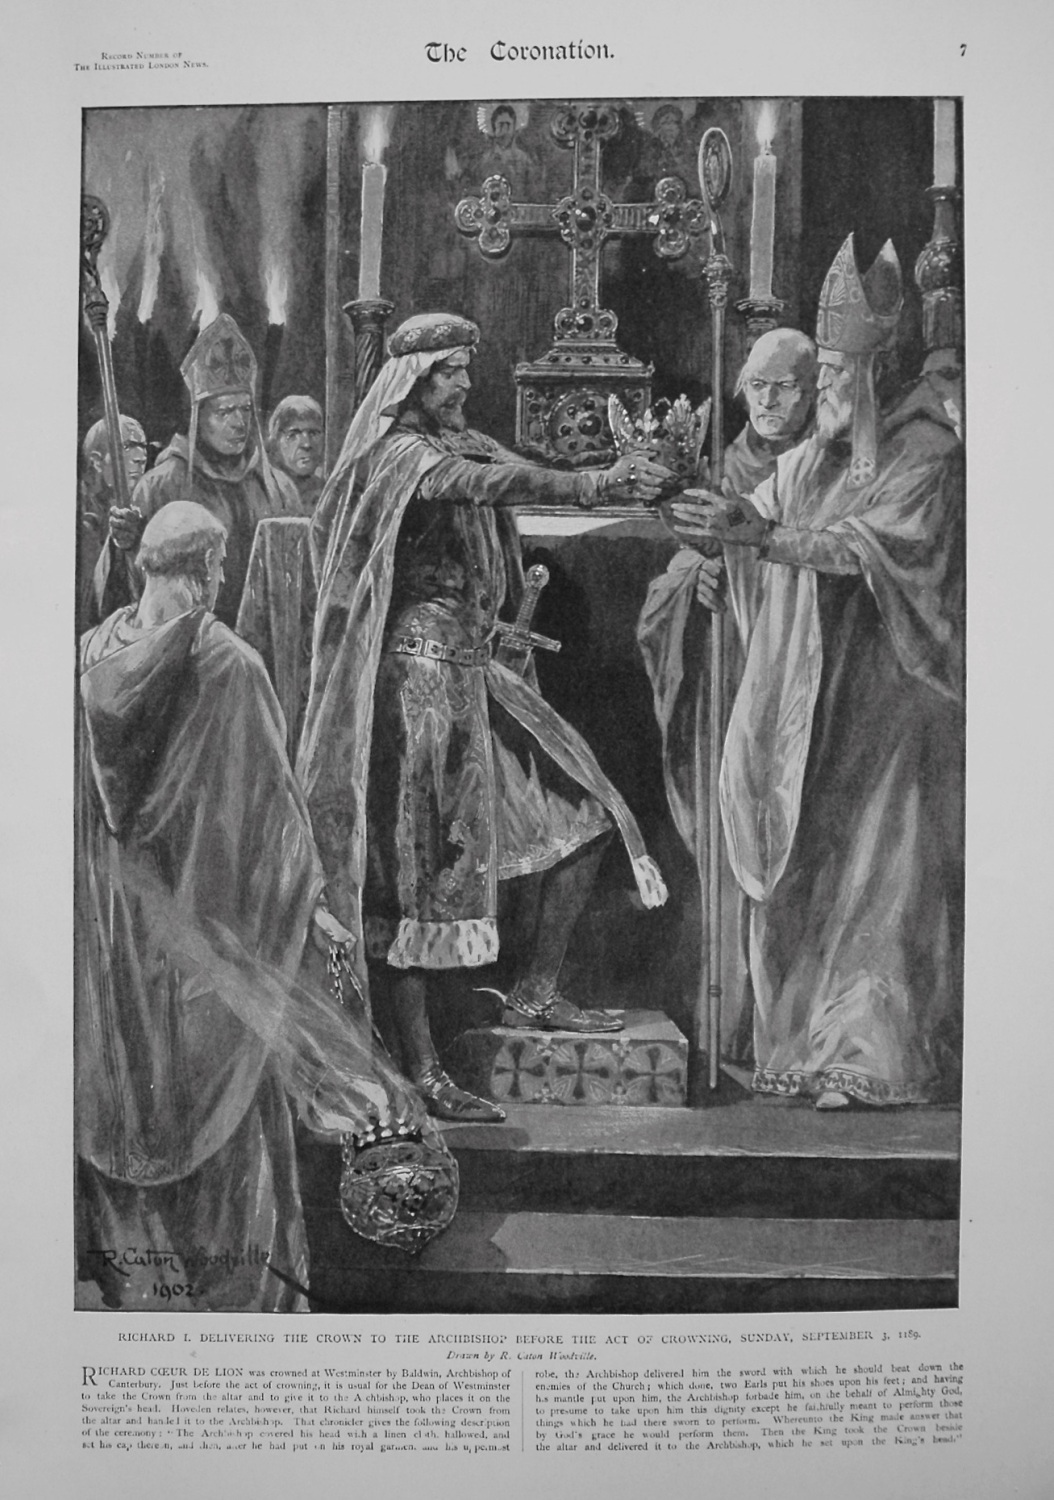 Richard I. Delivering the Crown to the Archbishop before the Act of Crownin